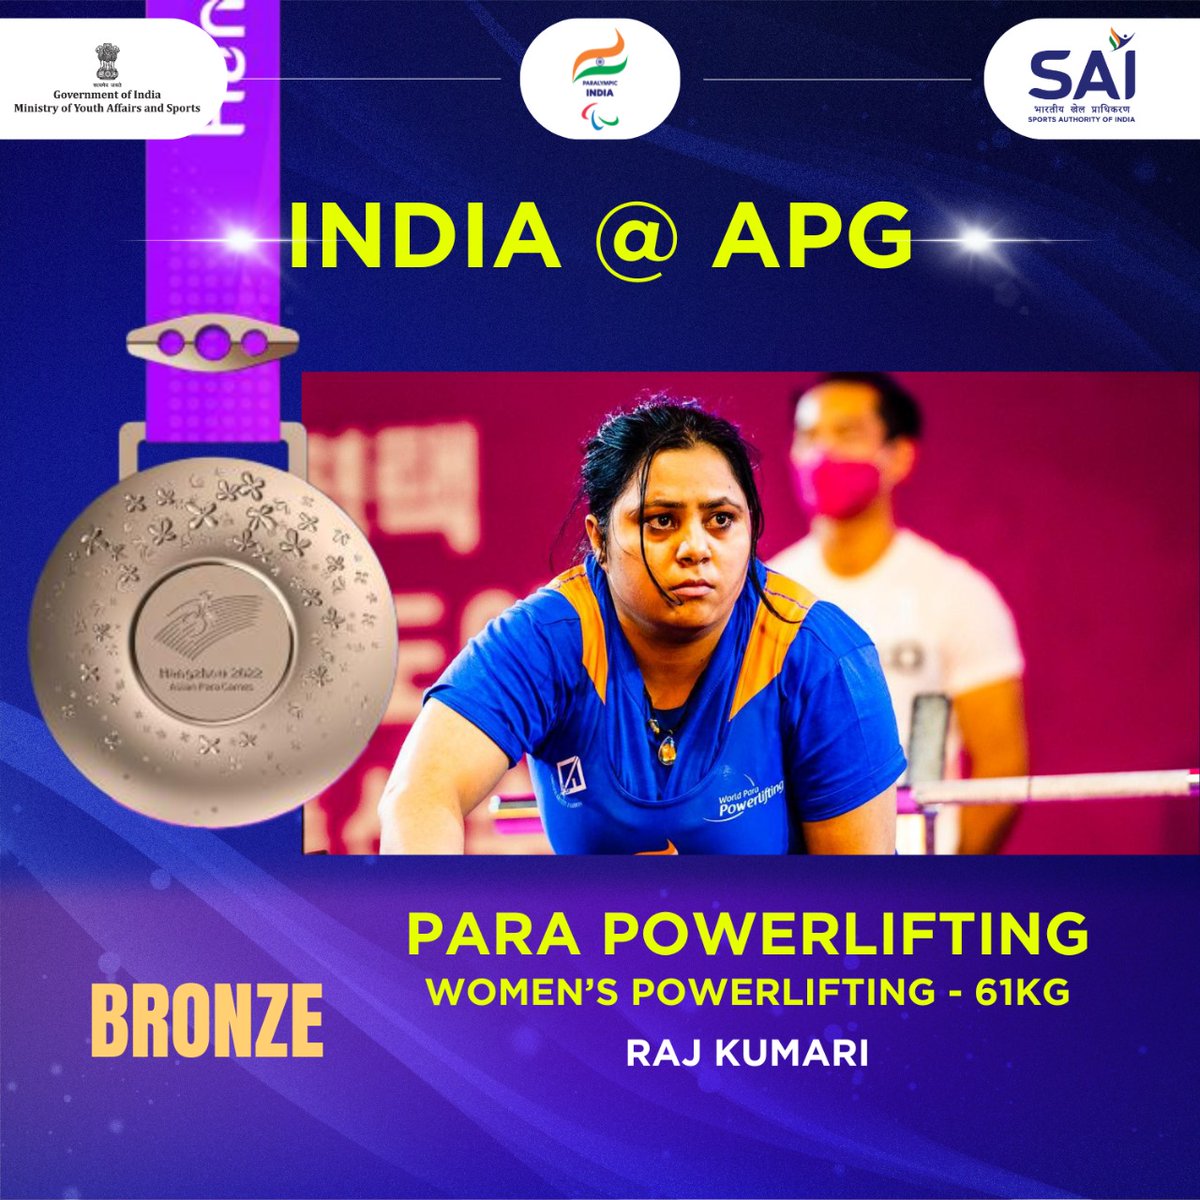 Let's celebrate 🇮🇳's double triumph in #ParaPowerlifting at #AsianParaGames2022

Zainab Khatoon won #Silver with a best lift of 85kg in Women's 61kg weight category

Meanwhile, compatriot & NCOE @SAI_Gandhinagar  athlete Raj Kumari won #Bronze with a best lift of 84kg in the same